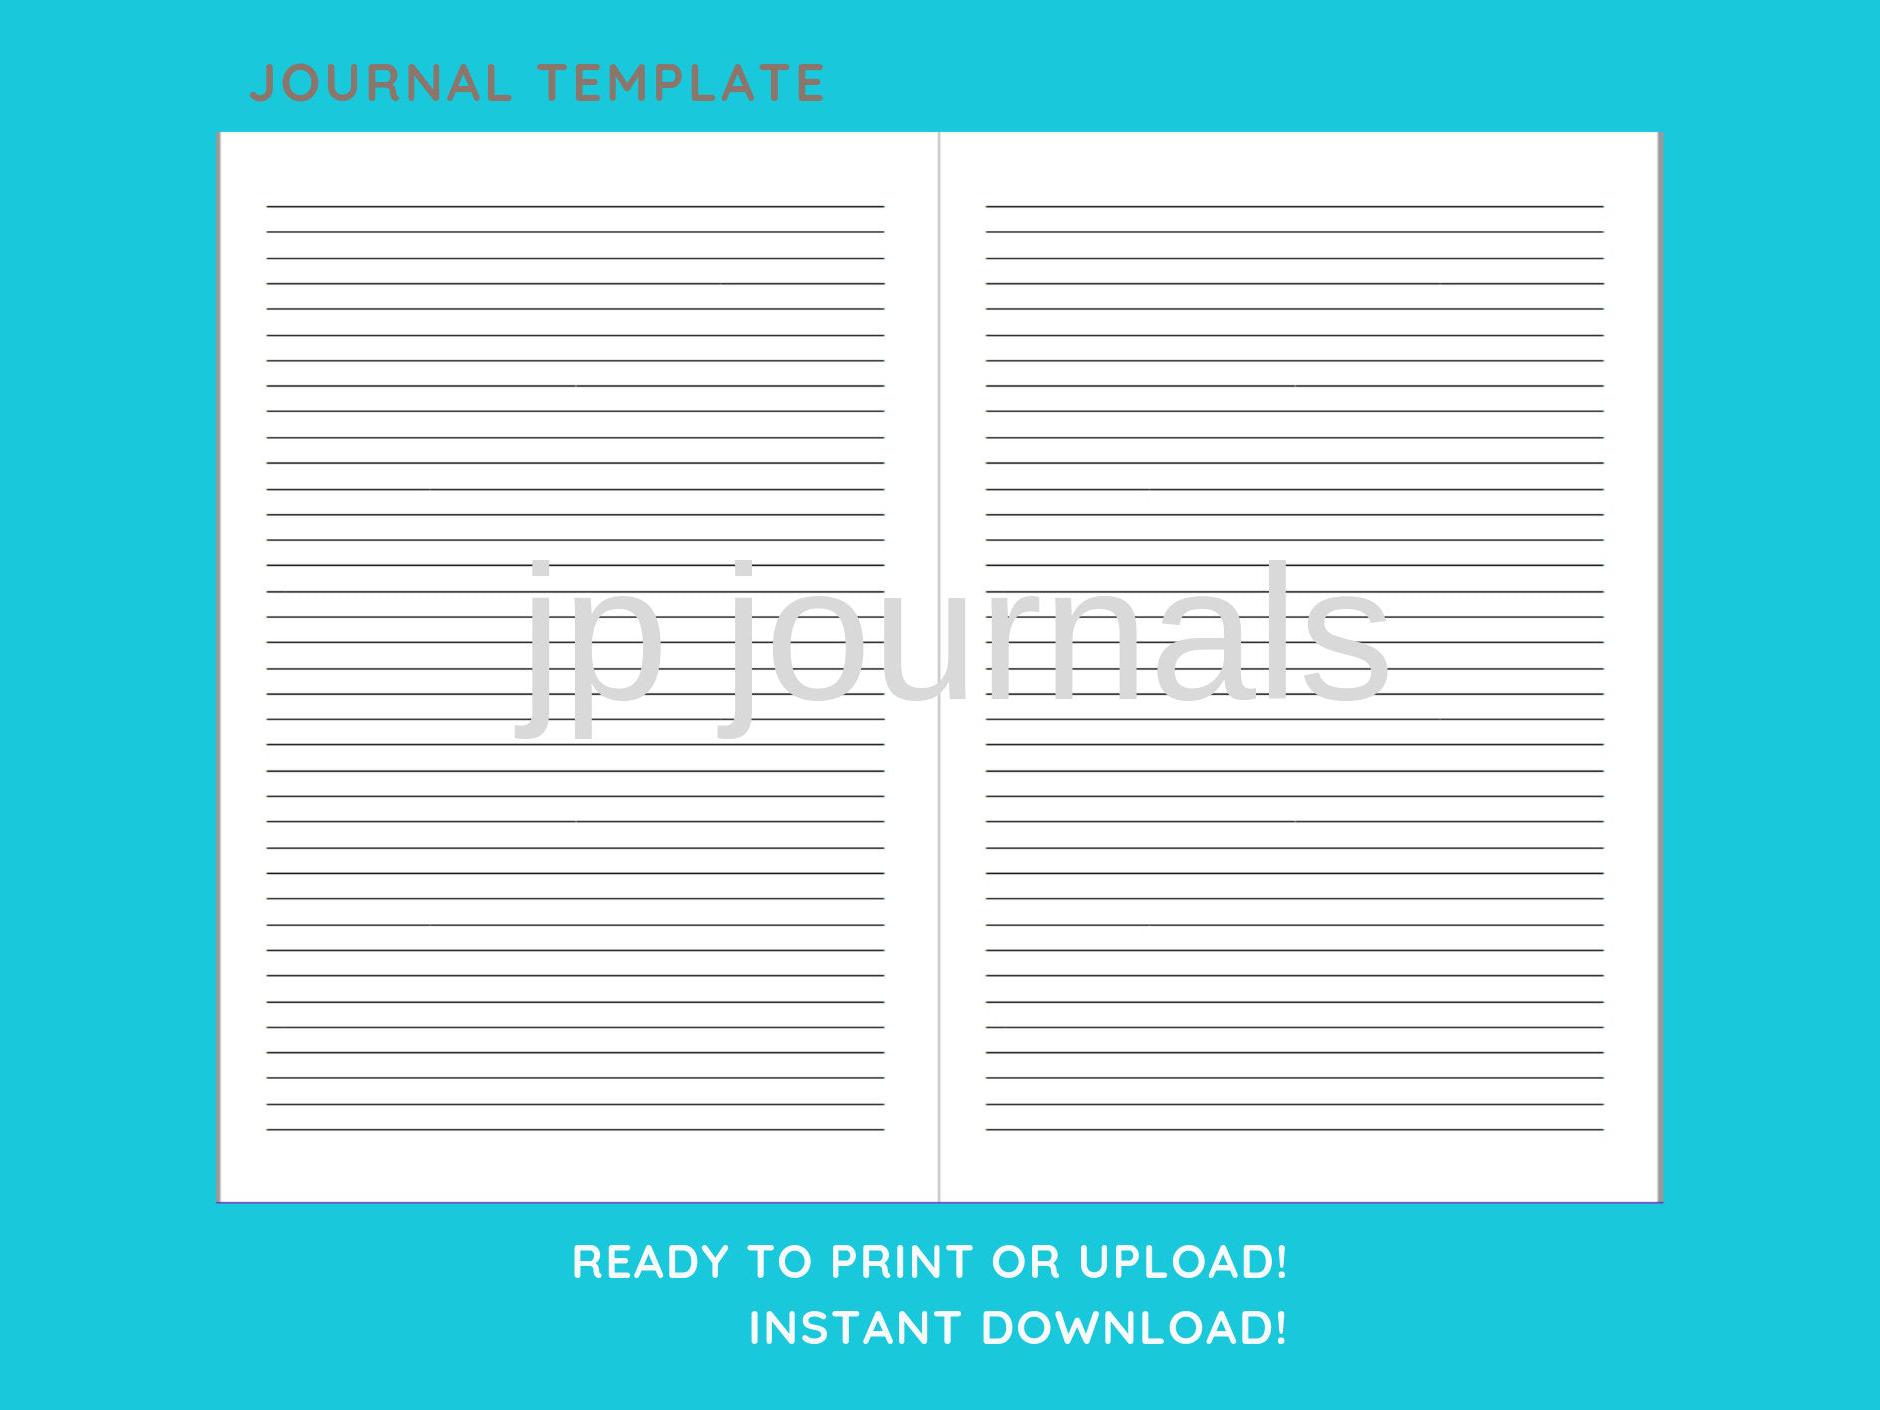 KDP Kindle Direct Publishing Ready To Upload Blank Journal Template 6"x9"